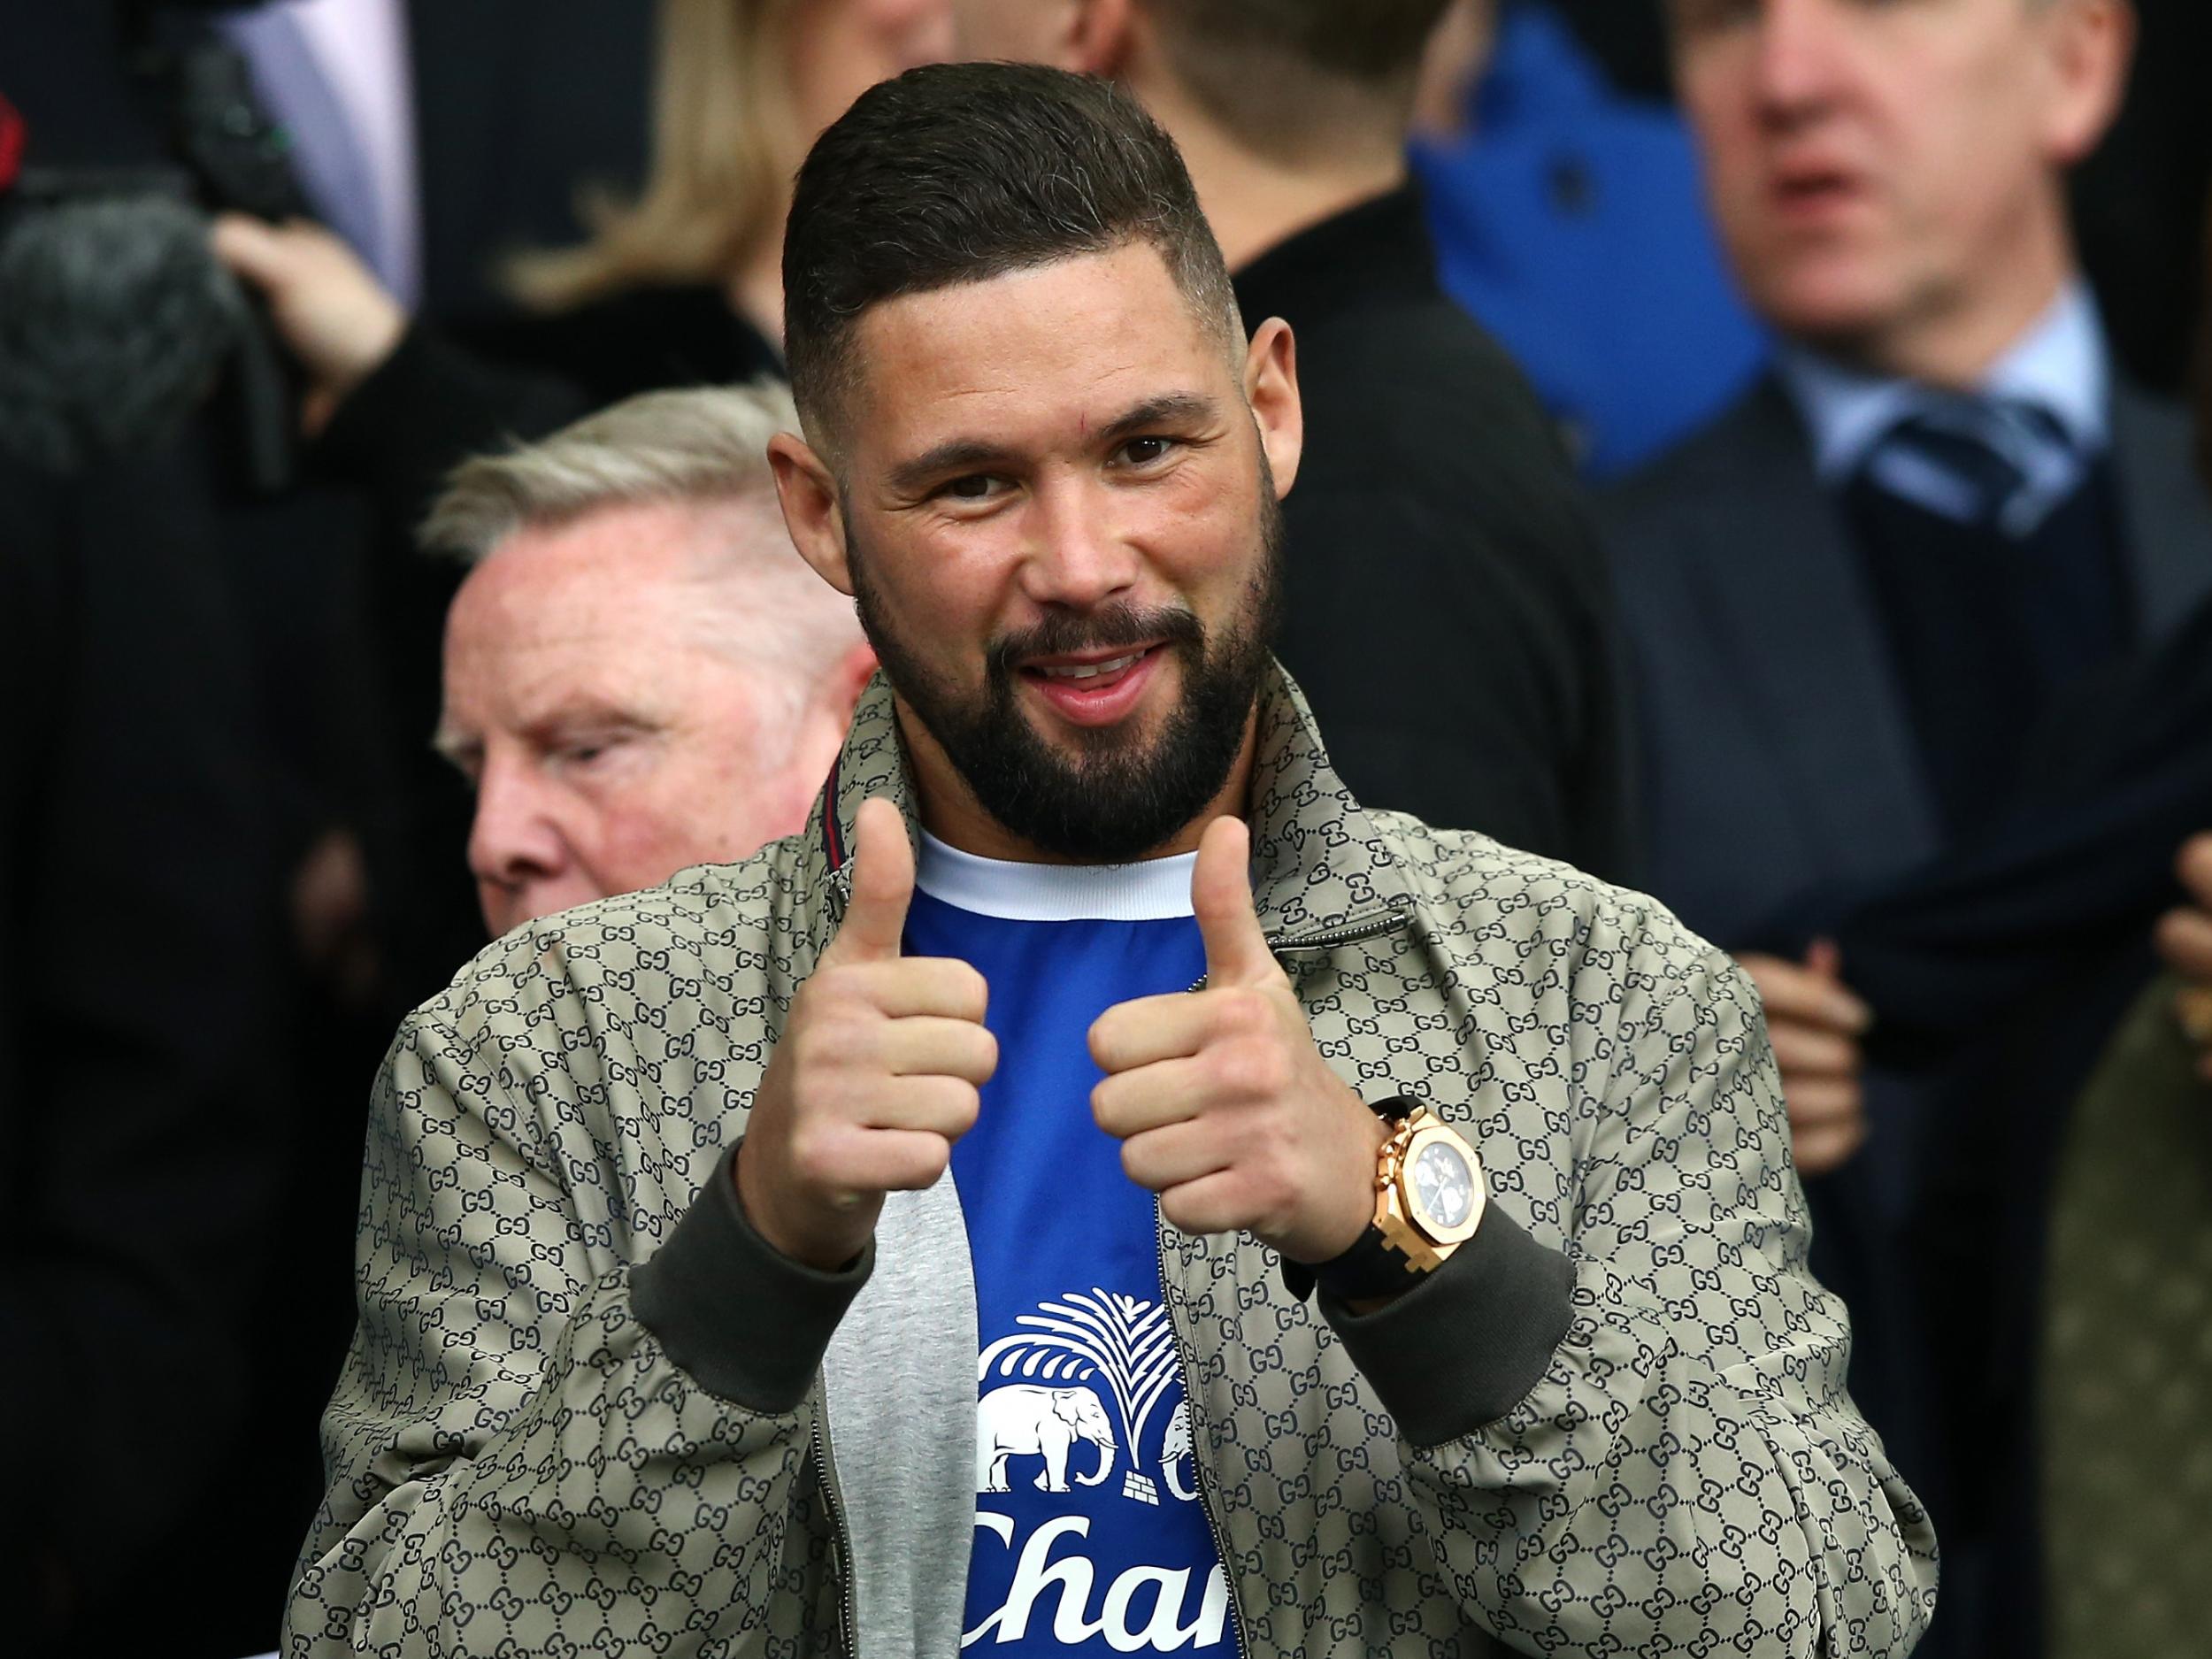 Bellew's promoter has said the boxer will return to the ring